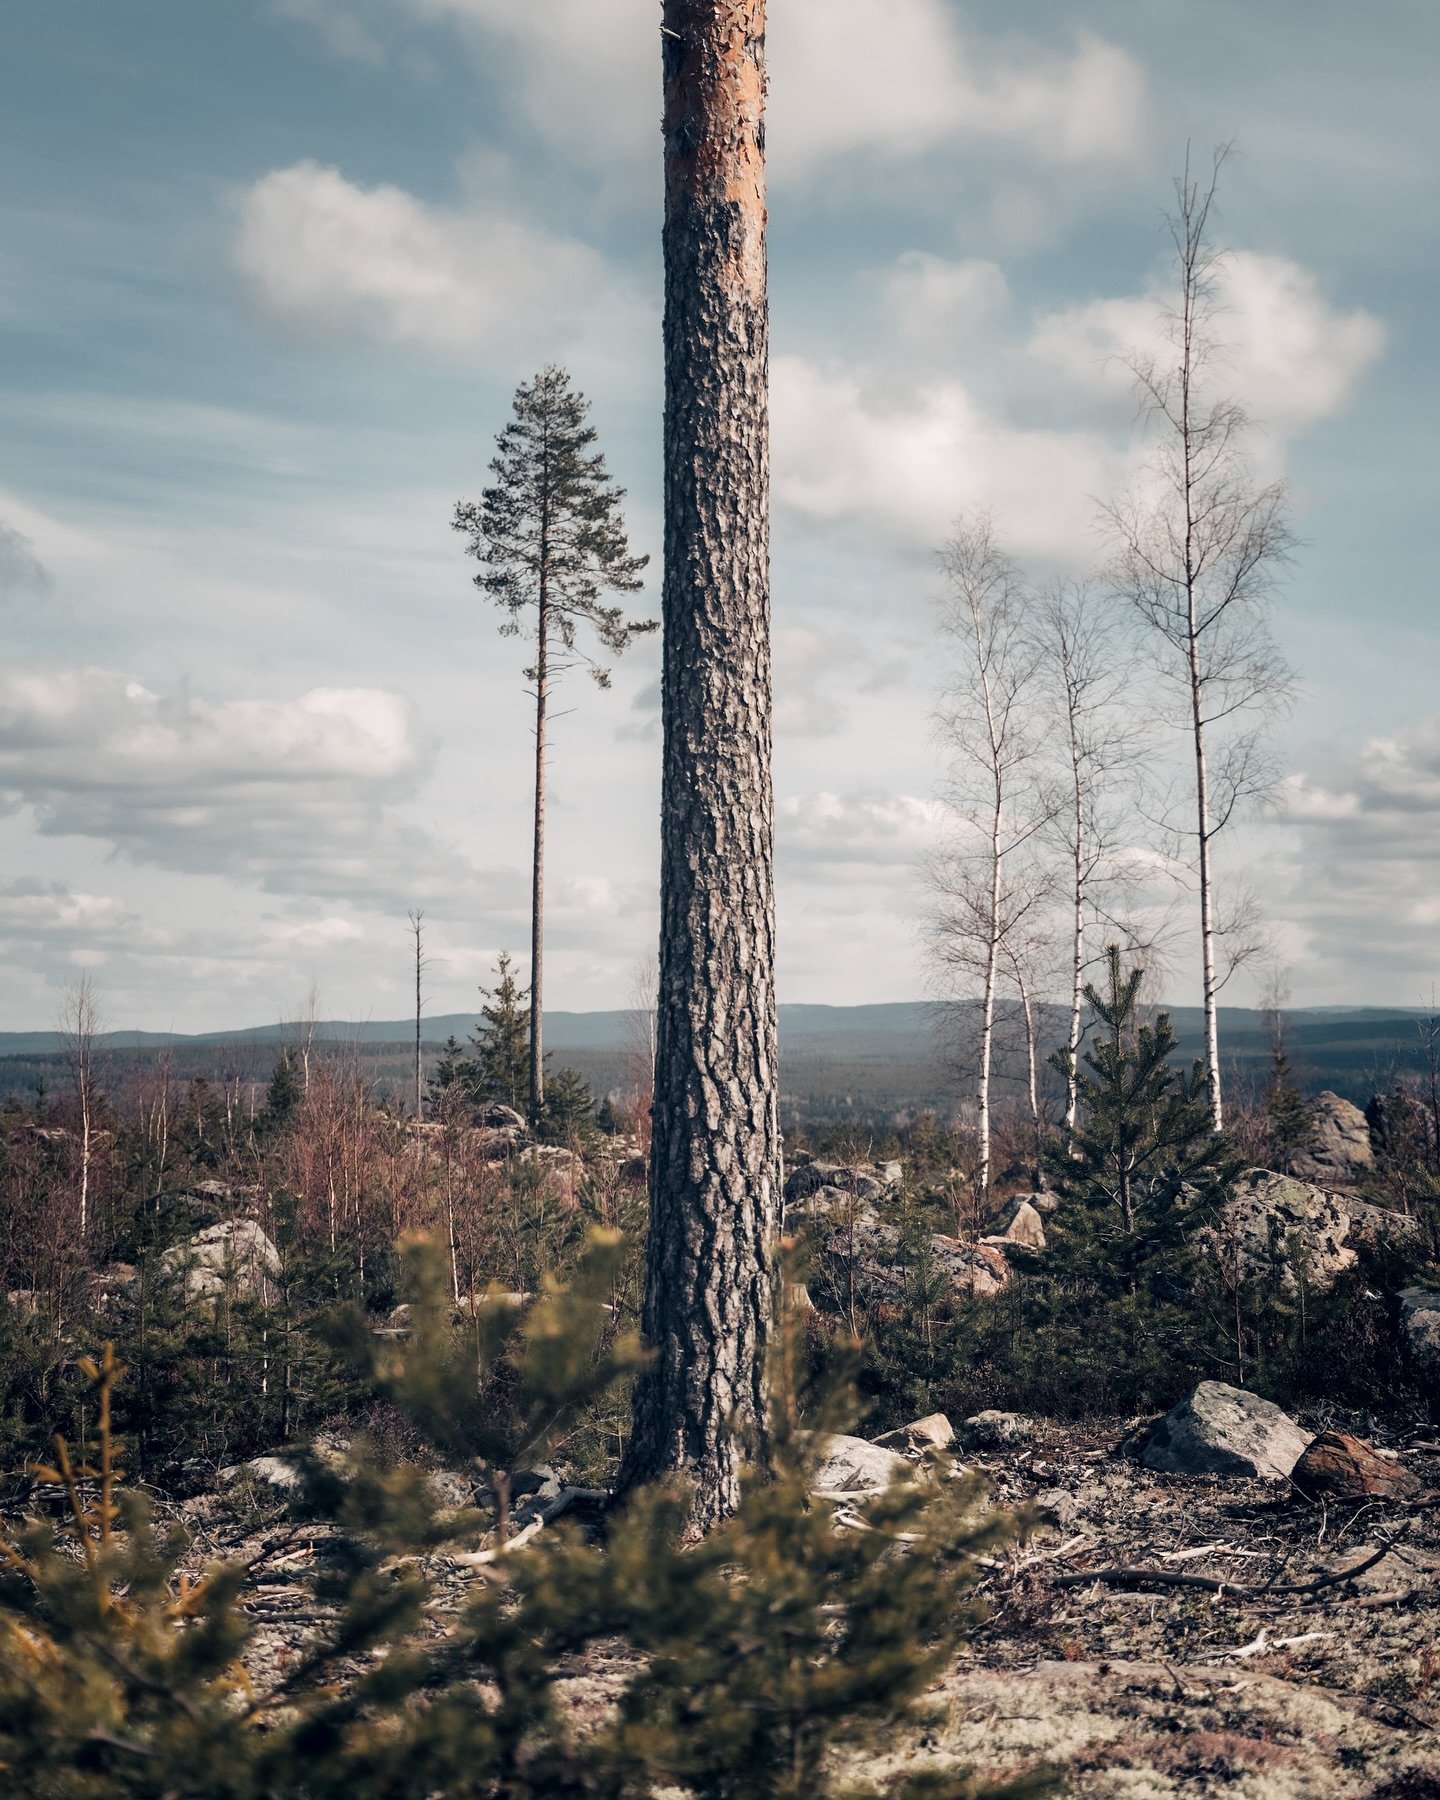 Sunday hike. Cold winds, proud pines, ravens croaking
.
.
#canonnordic #sweden#visitdalarna
#tree #tree_brilliance #tree_magic #raw_alltrees #your_trees_ #tree_shotz #tree_captures #moodylandscapes  #moodyscenery #moodynature #natures_mood #landscape